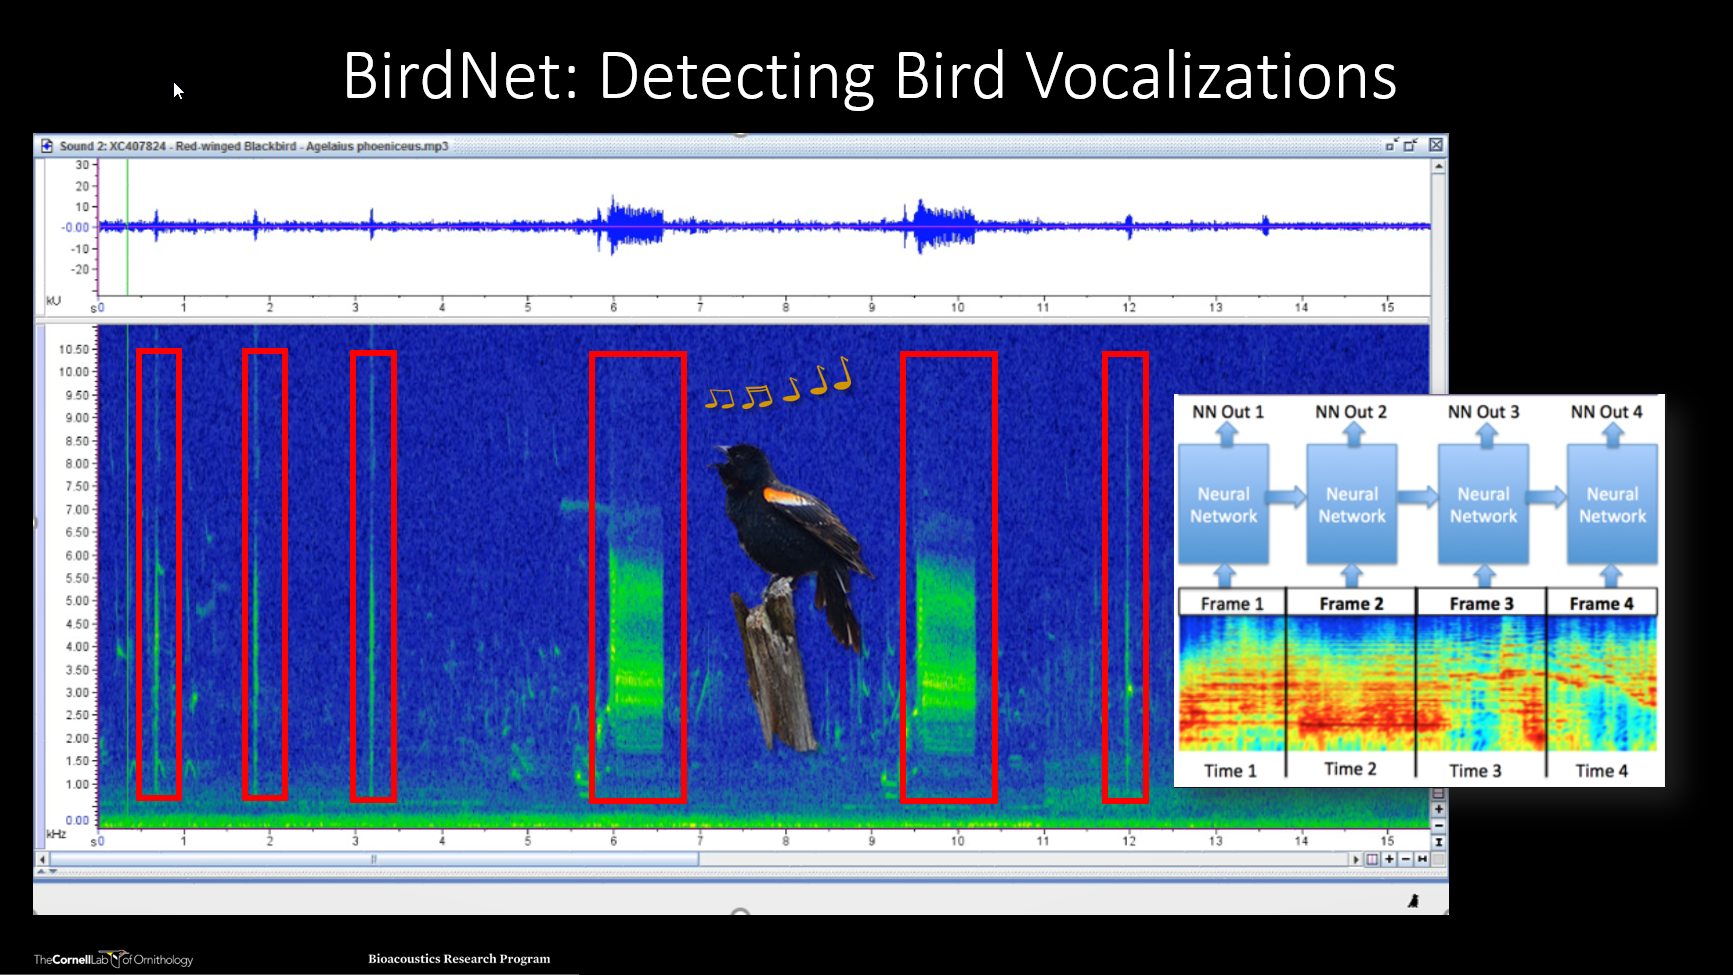 BirdNet is a software tool that can be used to detect species vocalizations in the sound recordings using Deep Learning Algorithms